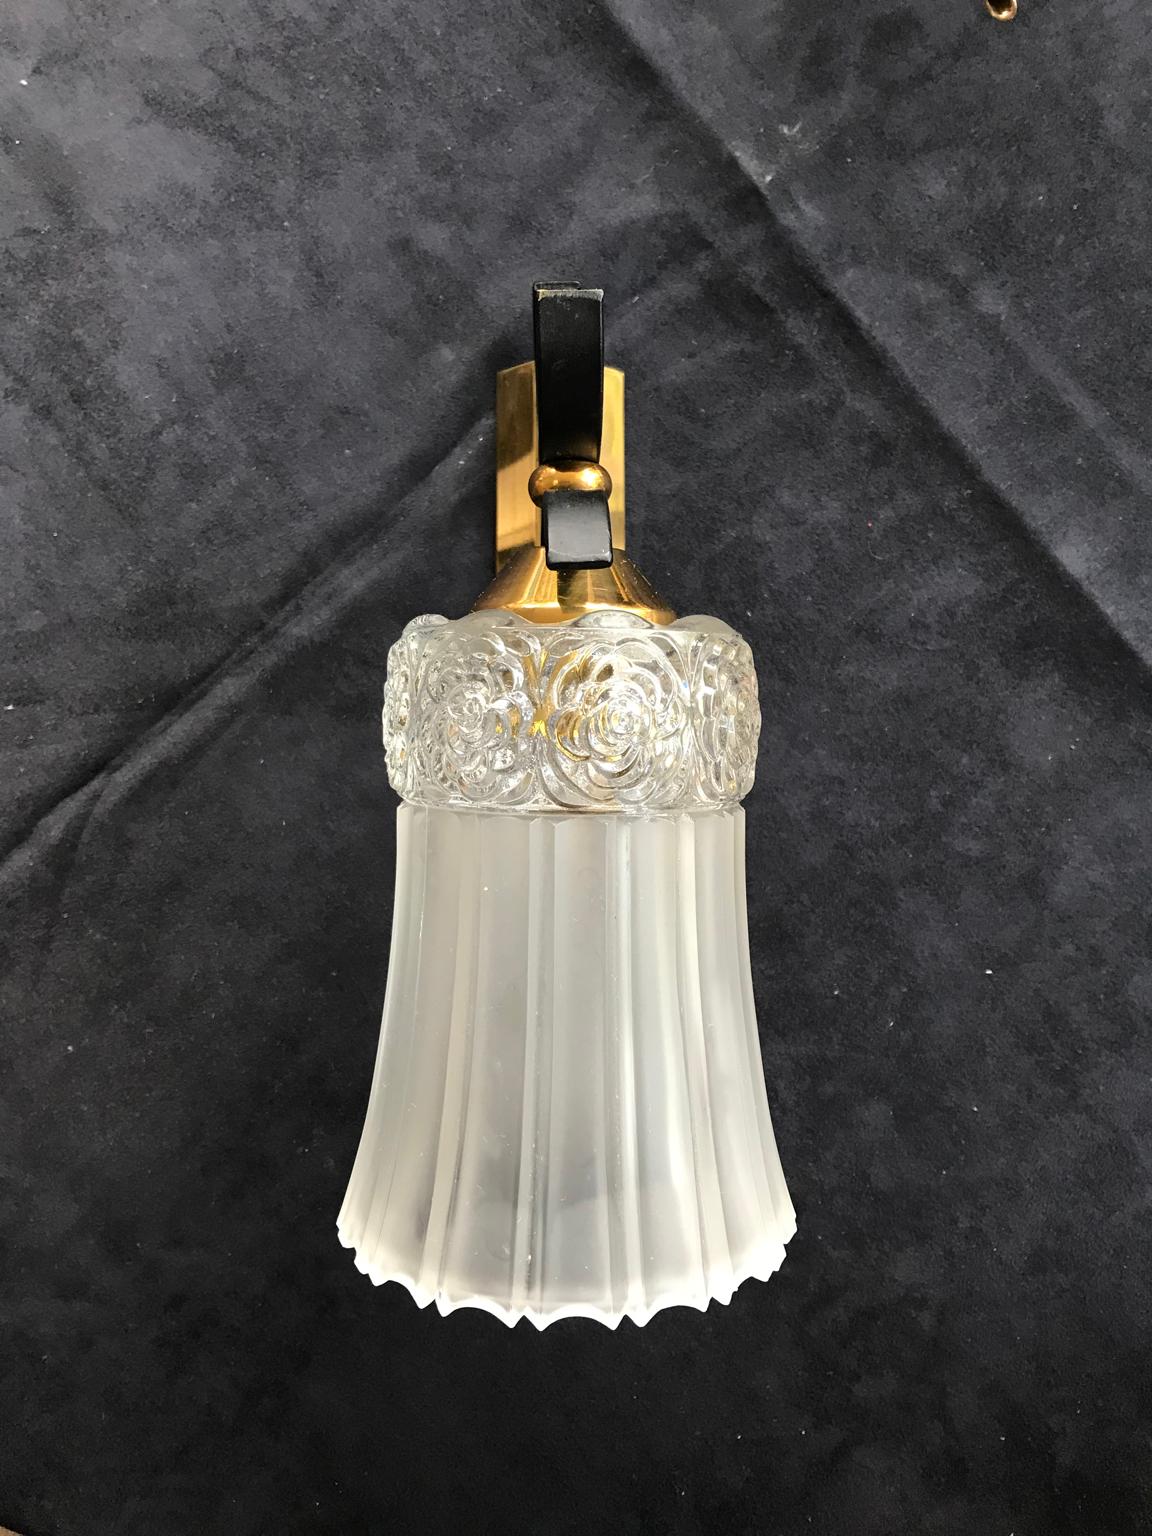 French pair of wall lamp sconces in gilt brass and black wrought iron with beautiful thick glass frosted lampshades with elegant flowers ornaments on the top part. In an excellent condition.
A very chic classy contrast of black, gold and white